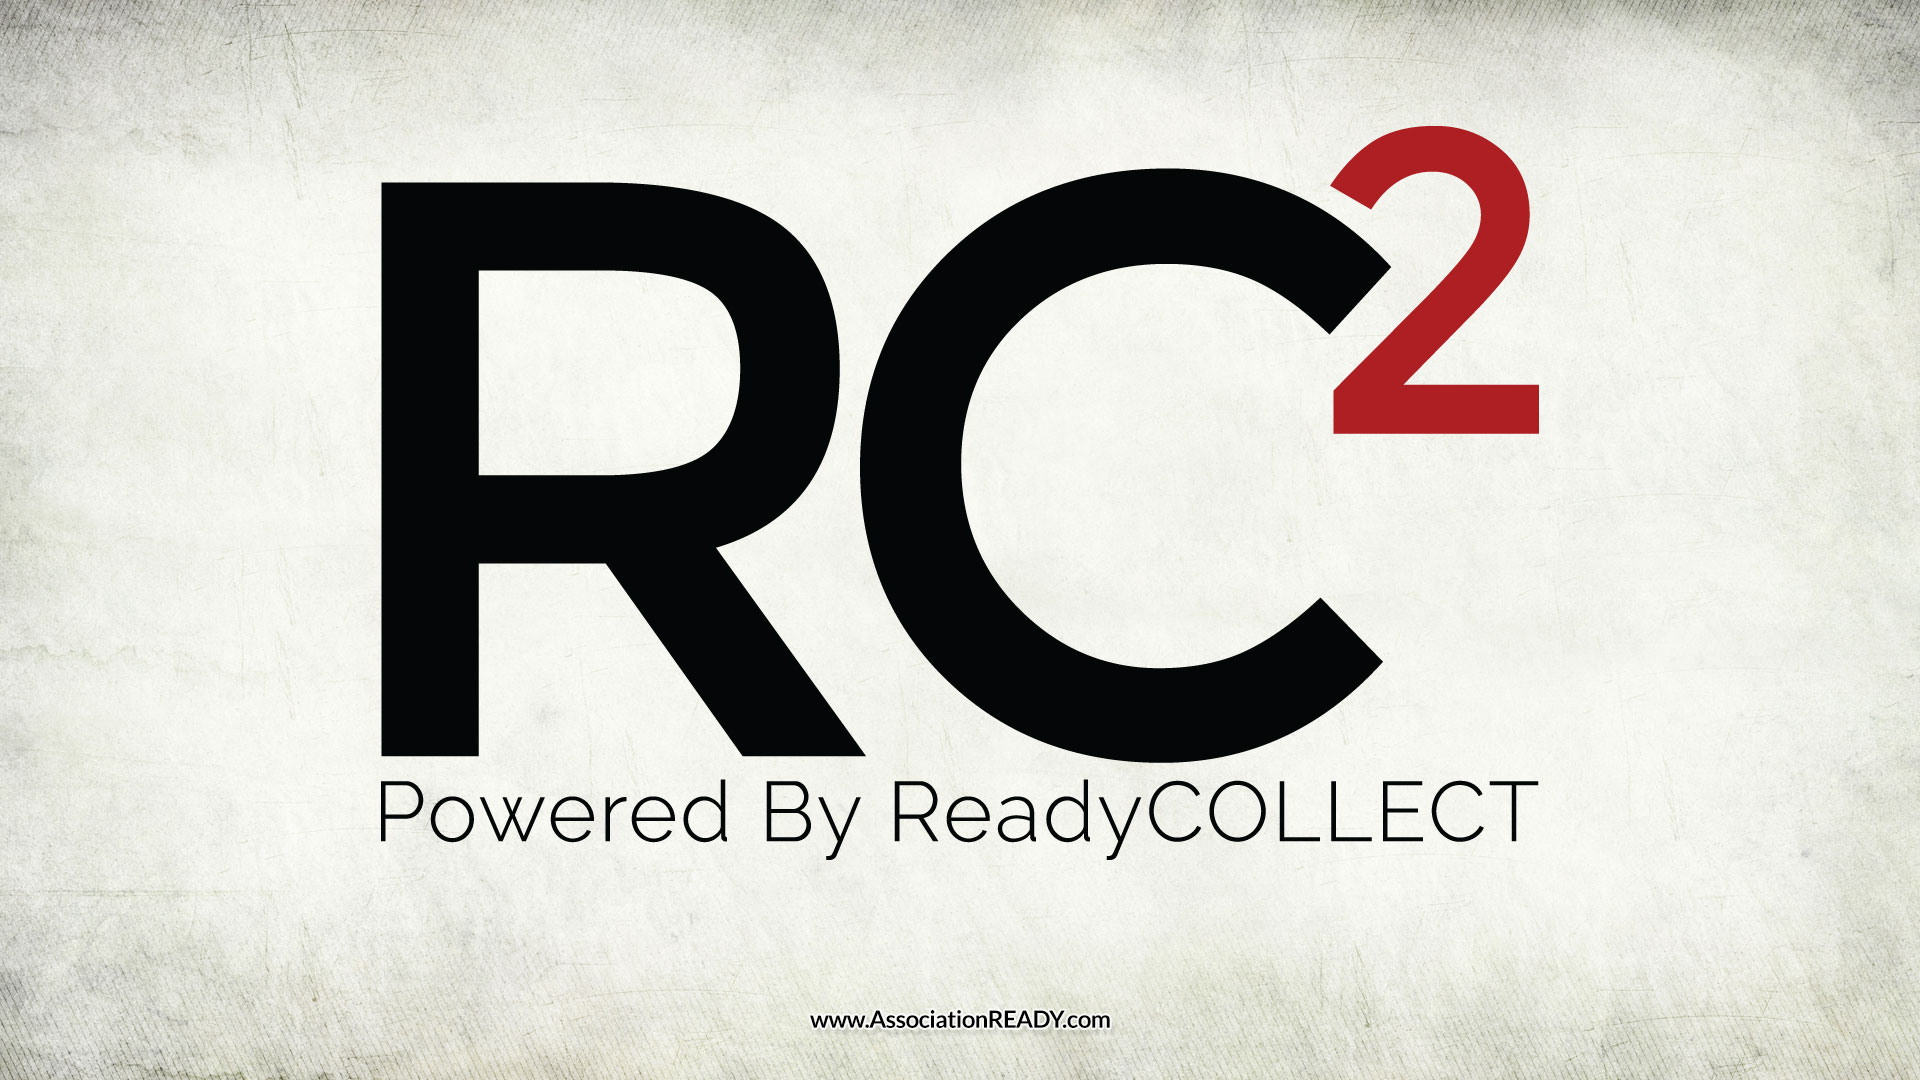 RC2 ReadyCOLLECT Grey Desktop WallPaper - Click to Download Larger Version